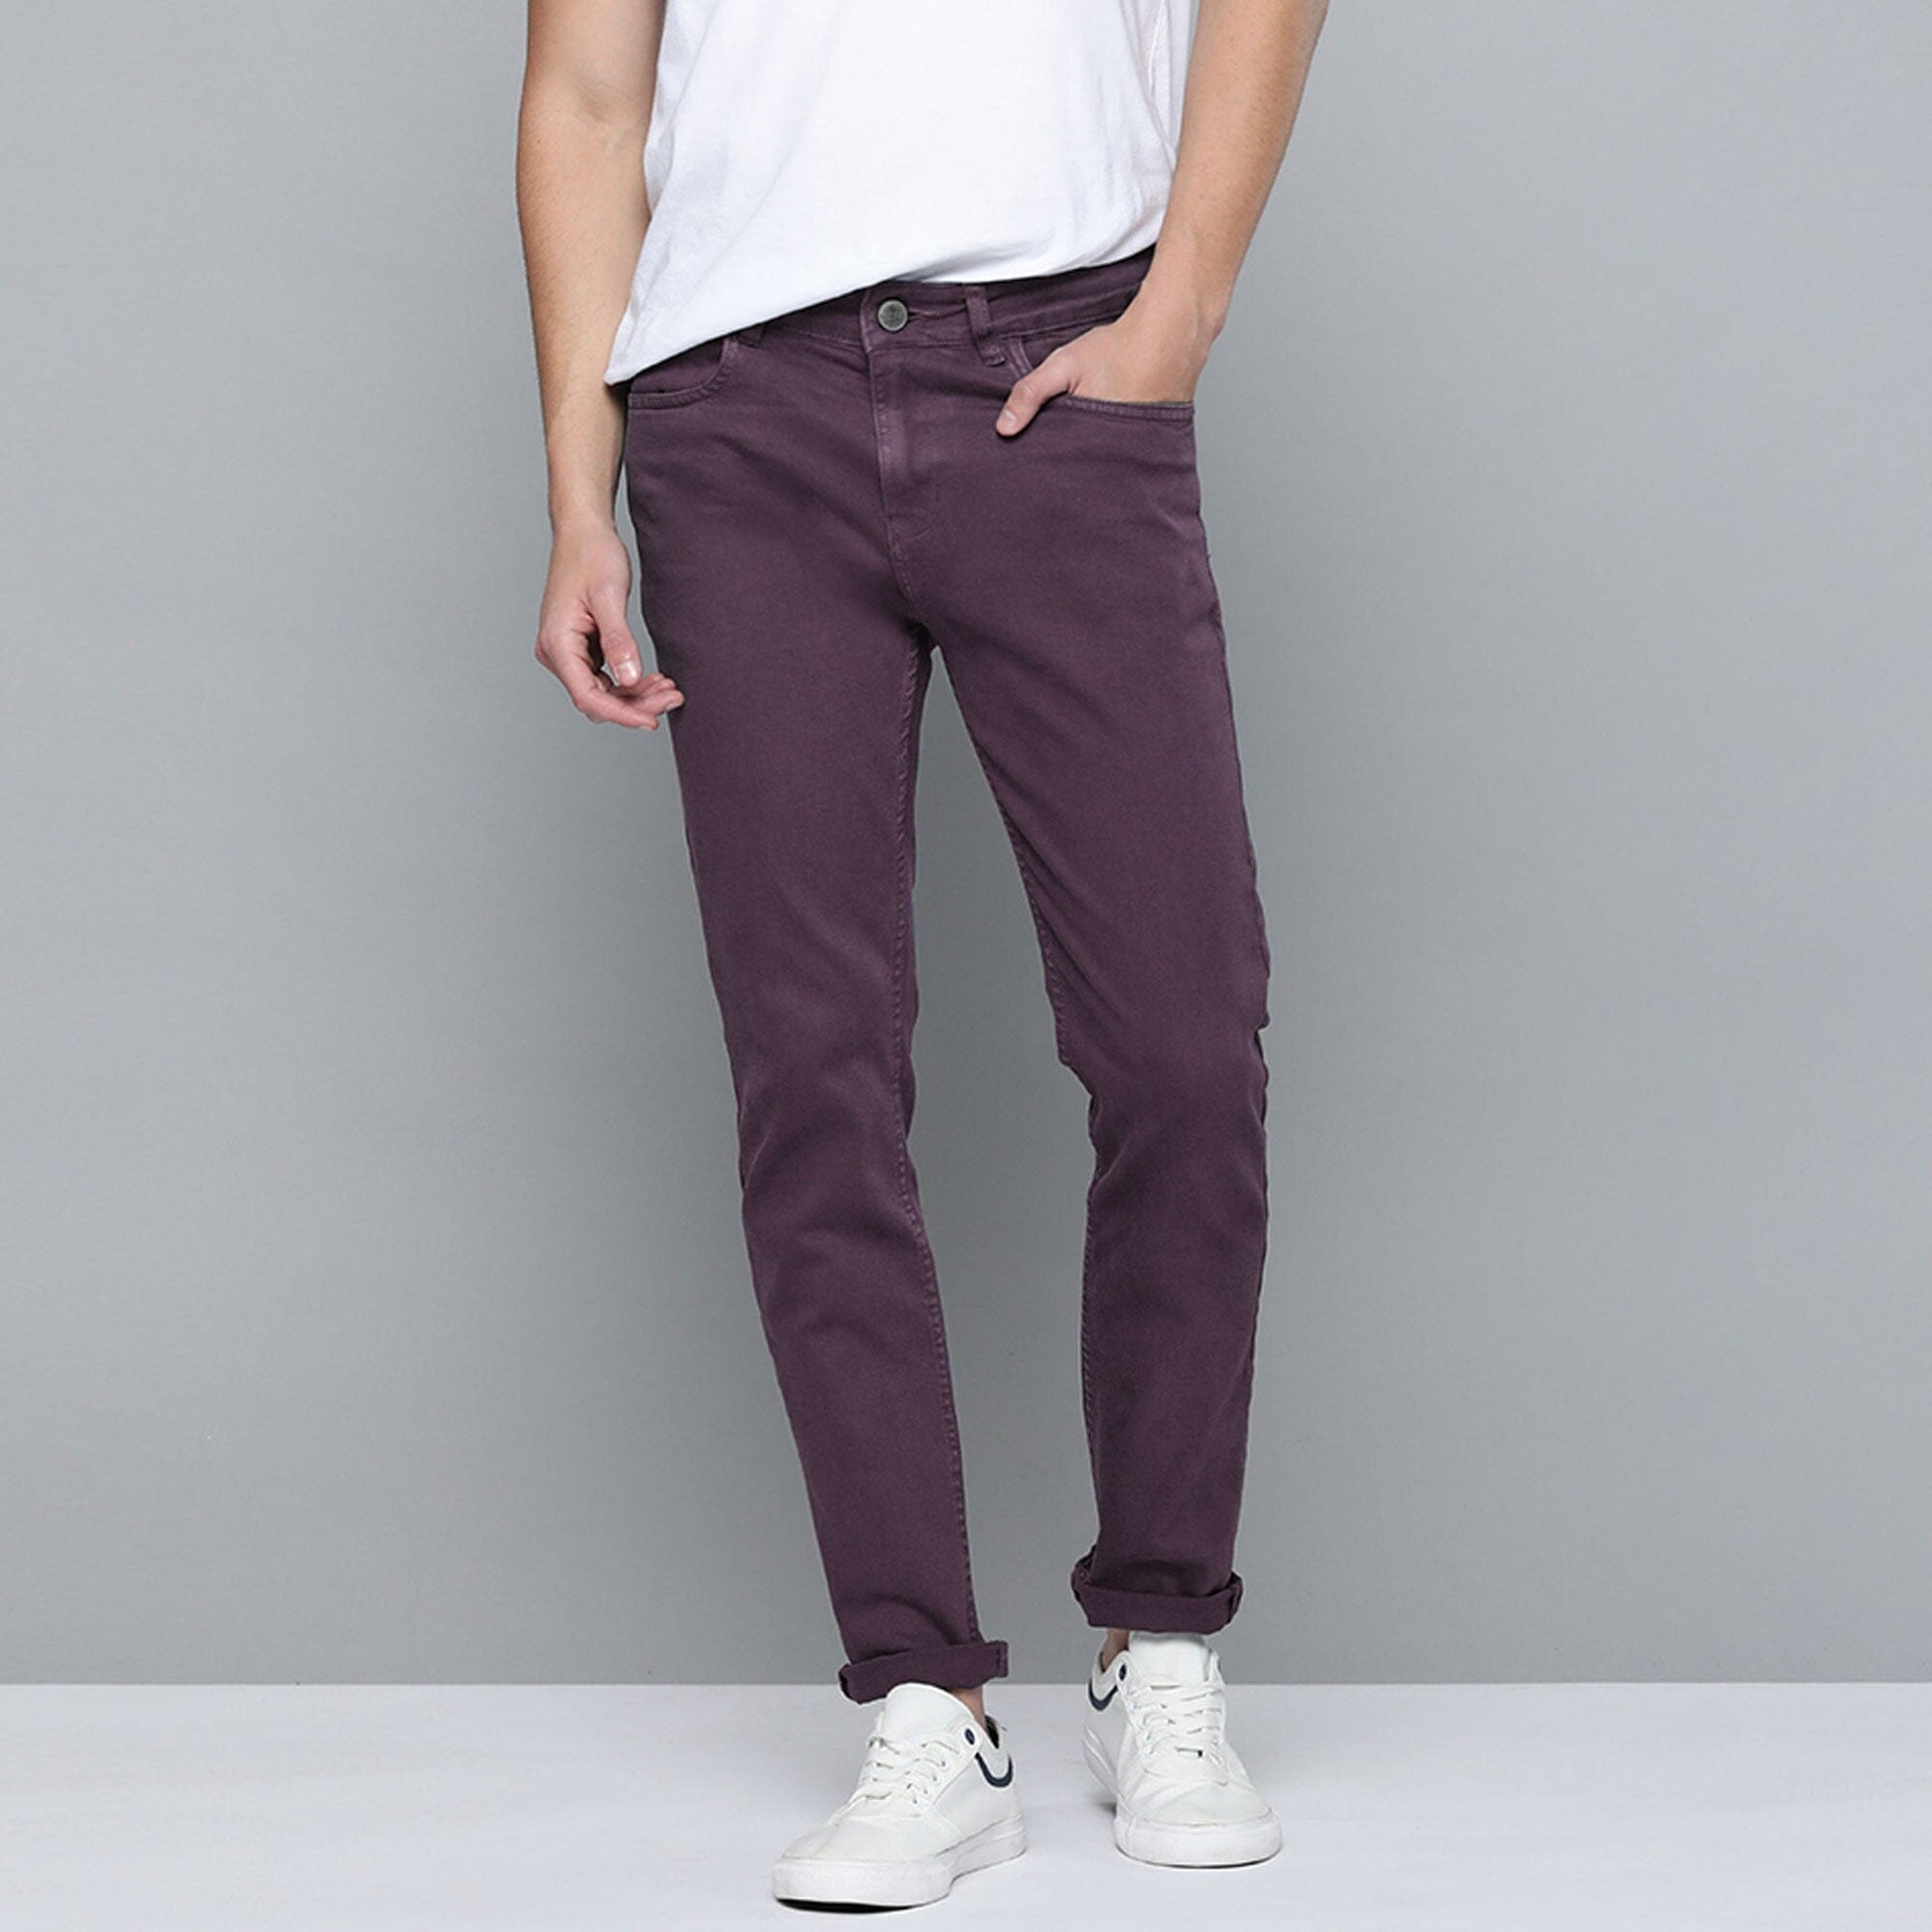 Cut Label Men's Slim Fit Chino Pants Men's Chino First Choice Wine 28 30